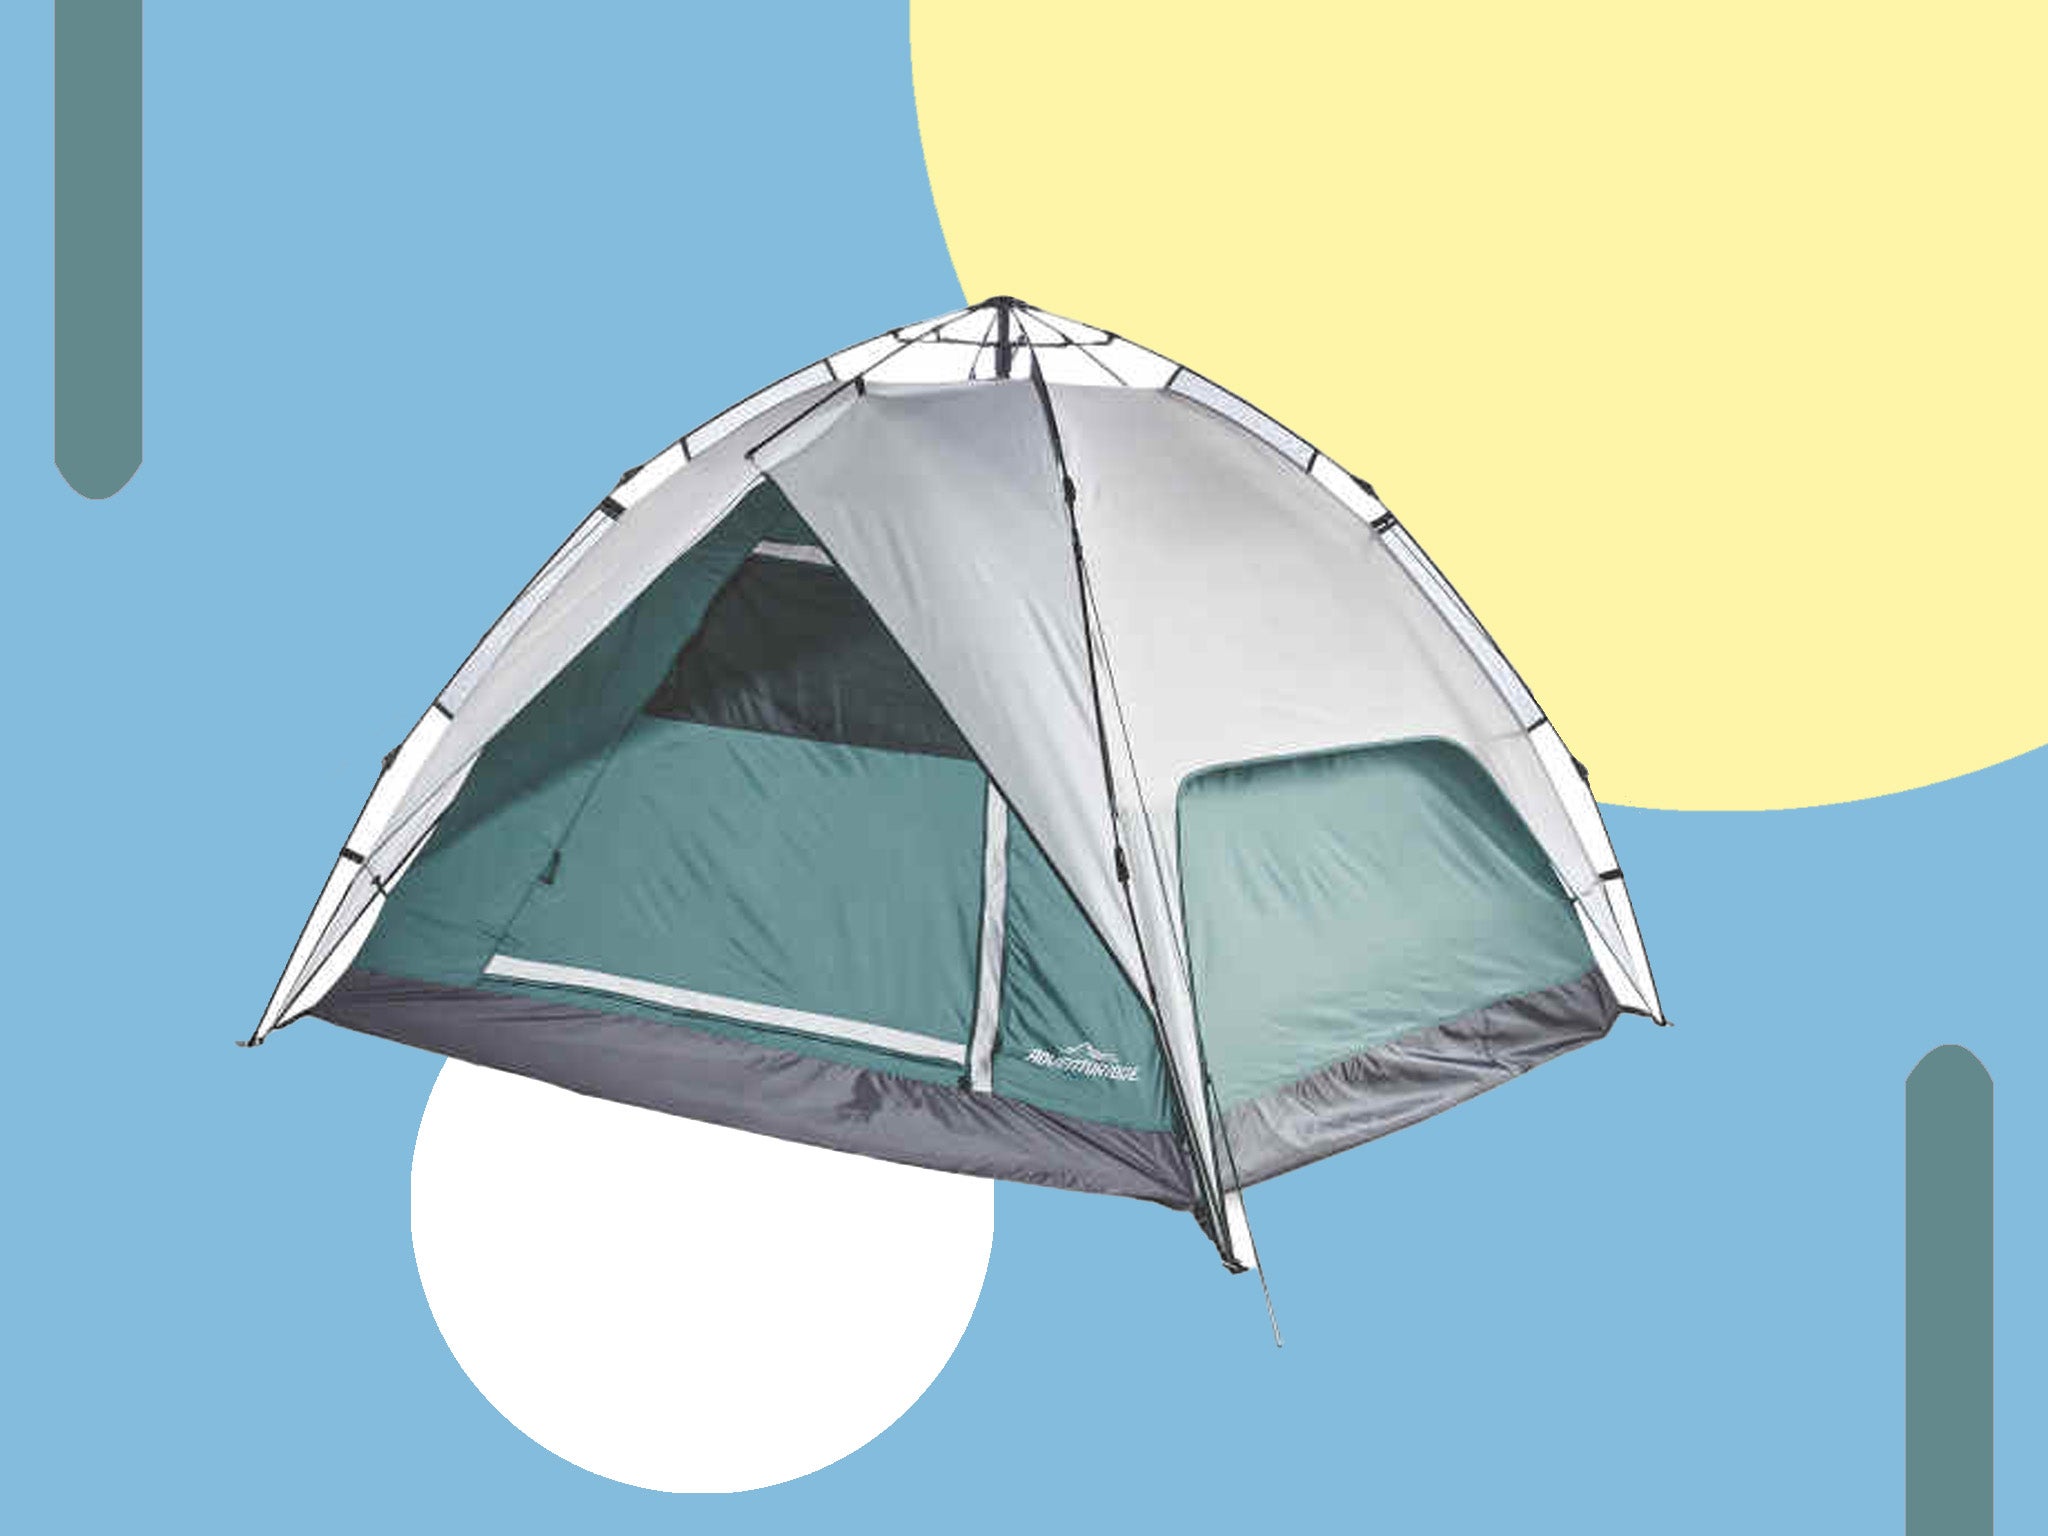 The tent has a cross ventilation system to help regulate temperature